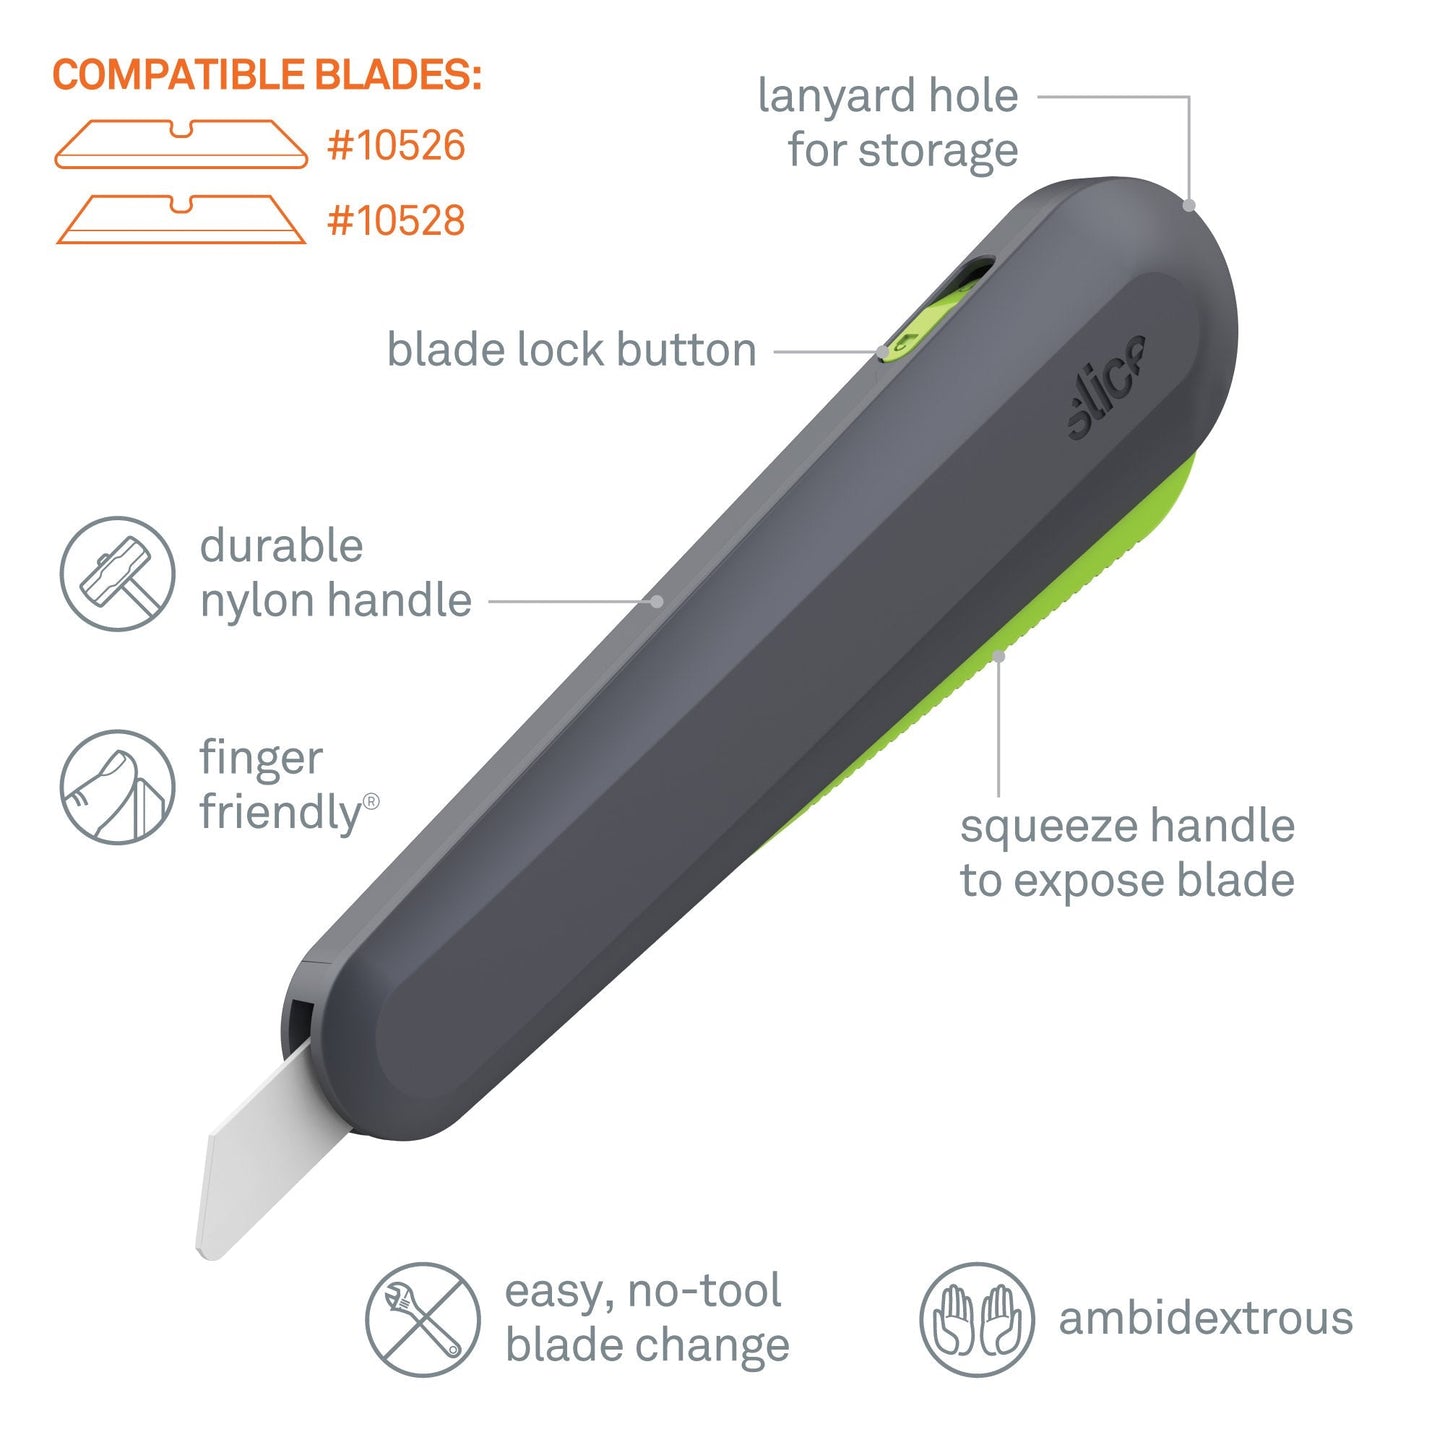 Auto-Retractable Squeeze-Trigger Utility Knife